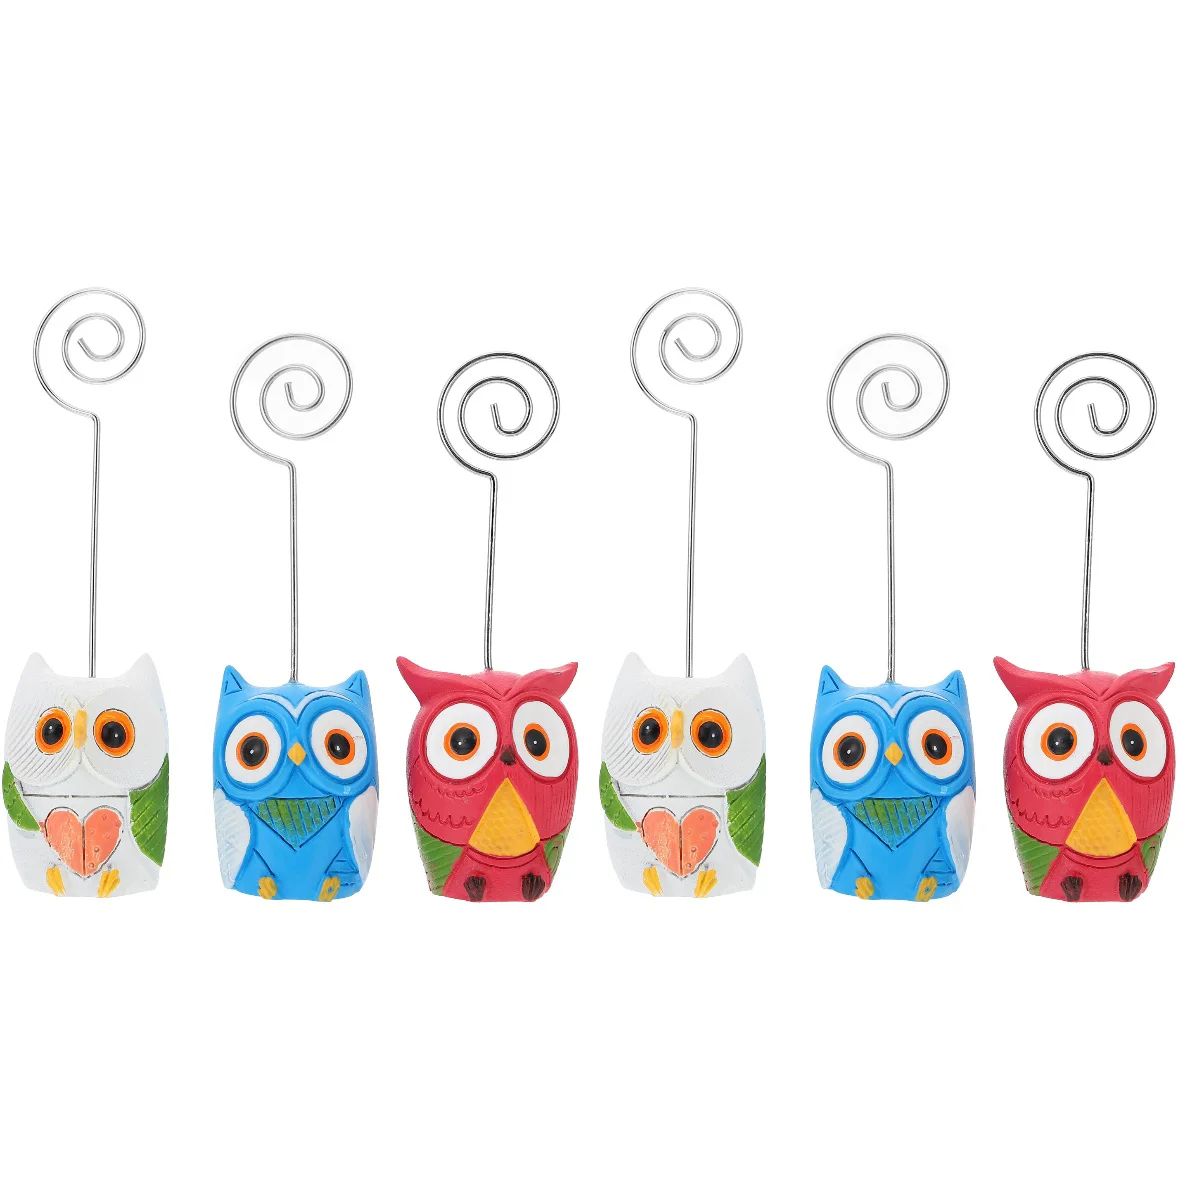 

6 Pcs Table Number Stands Work Desk Decor Wedding Table Numbers Wedding Decor Owl Clip Cute Metal Clamp